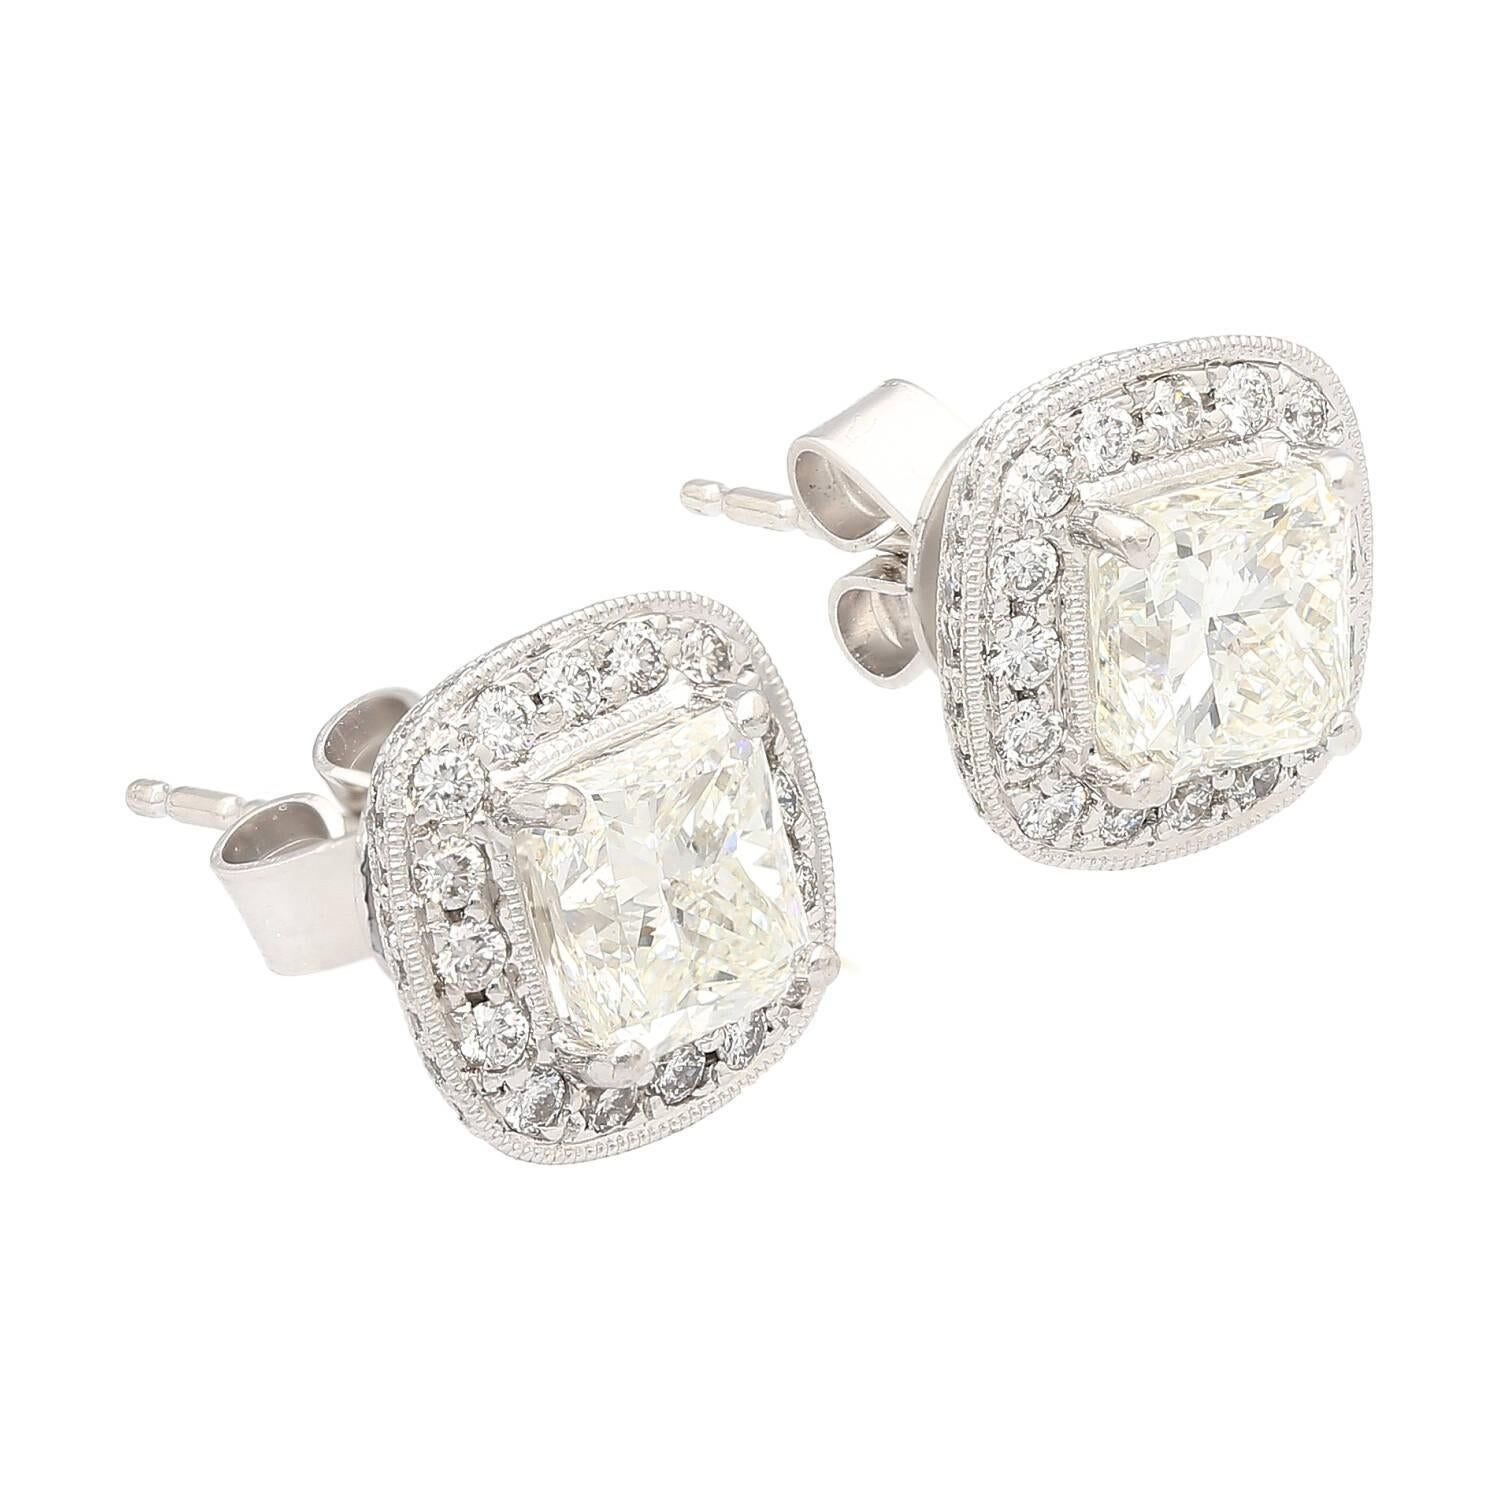 GIA Certified 3 Carat Total Radiant Cut Diamond Stud Earrings in 18k White Gold In New Condition For Sale In Miami, FL